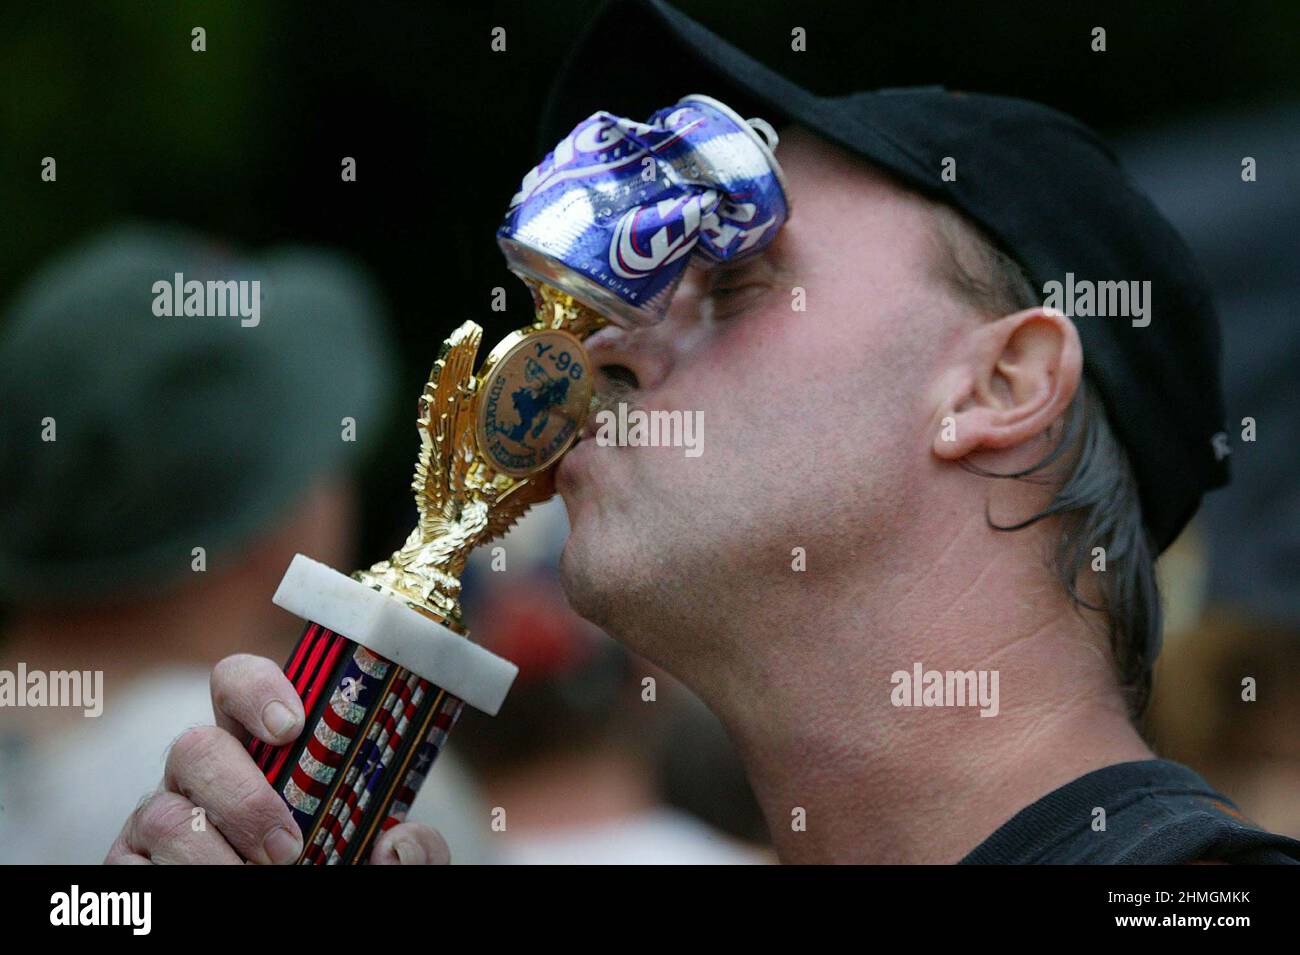 REDNECK ERIC ROBBERTSON FROM JEFFERONVILLE GOERGIA  KISSES HIS CRUSHED BEER CAN AWARD FOR WINNING THE PIG FEET DUNKING   AT THE REDNECK GAMES EAST DUBLIN GEORGIA USA. THE GAMES WERE  STARTED IN 1996 AS A RIVAL TO THE OLYMPIC GAMES HELD IN ATLANTA AND FEATURE AN UNUSUAL RANGE OF SPORTS FROM DUCKING TO PIGS FEET TO BELLY FLOPPING IN TO A MUD PIT. THE GAMES IN THERE TENTH YEAR NOW DRAW UP TO 10,000 REDNECKS FROM THE HEART OF REDNECK LAND GEORGIA STATE. PICTURES: GARYROBERTSPHOTO.COM Stock Photo